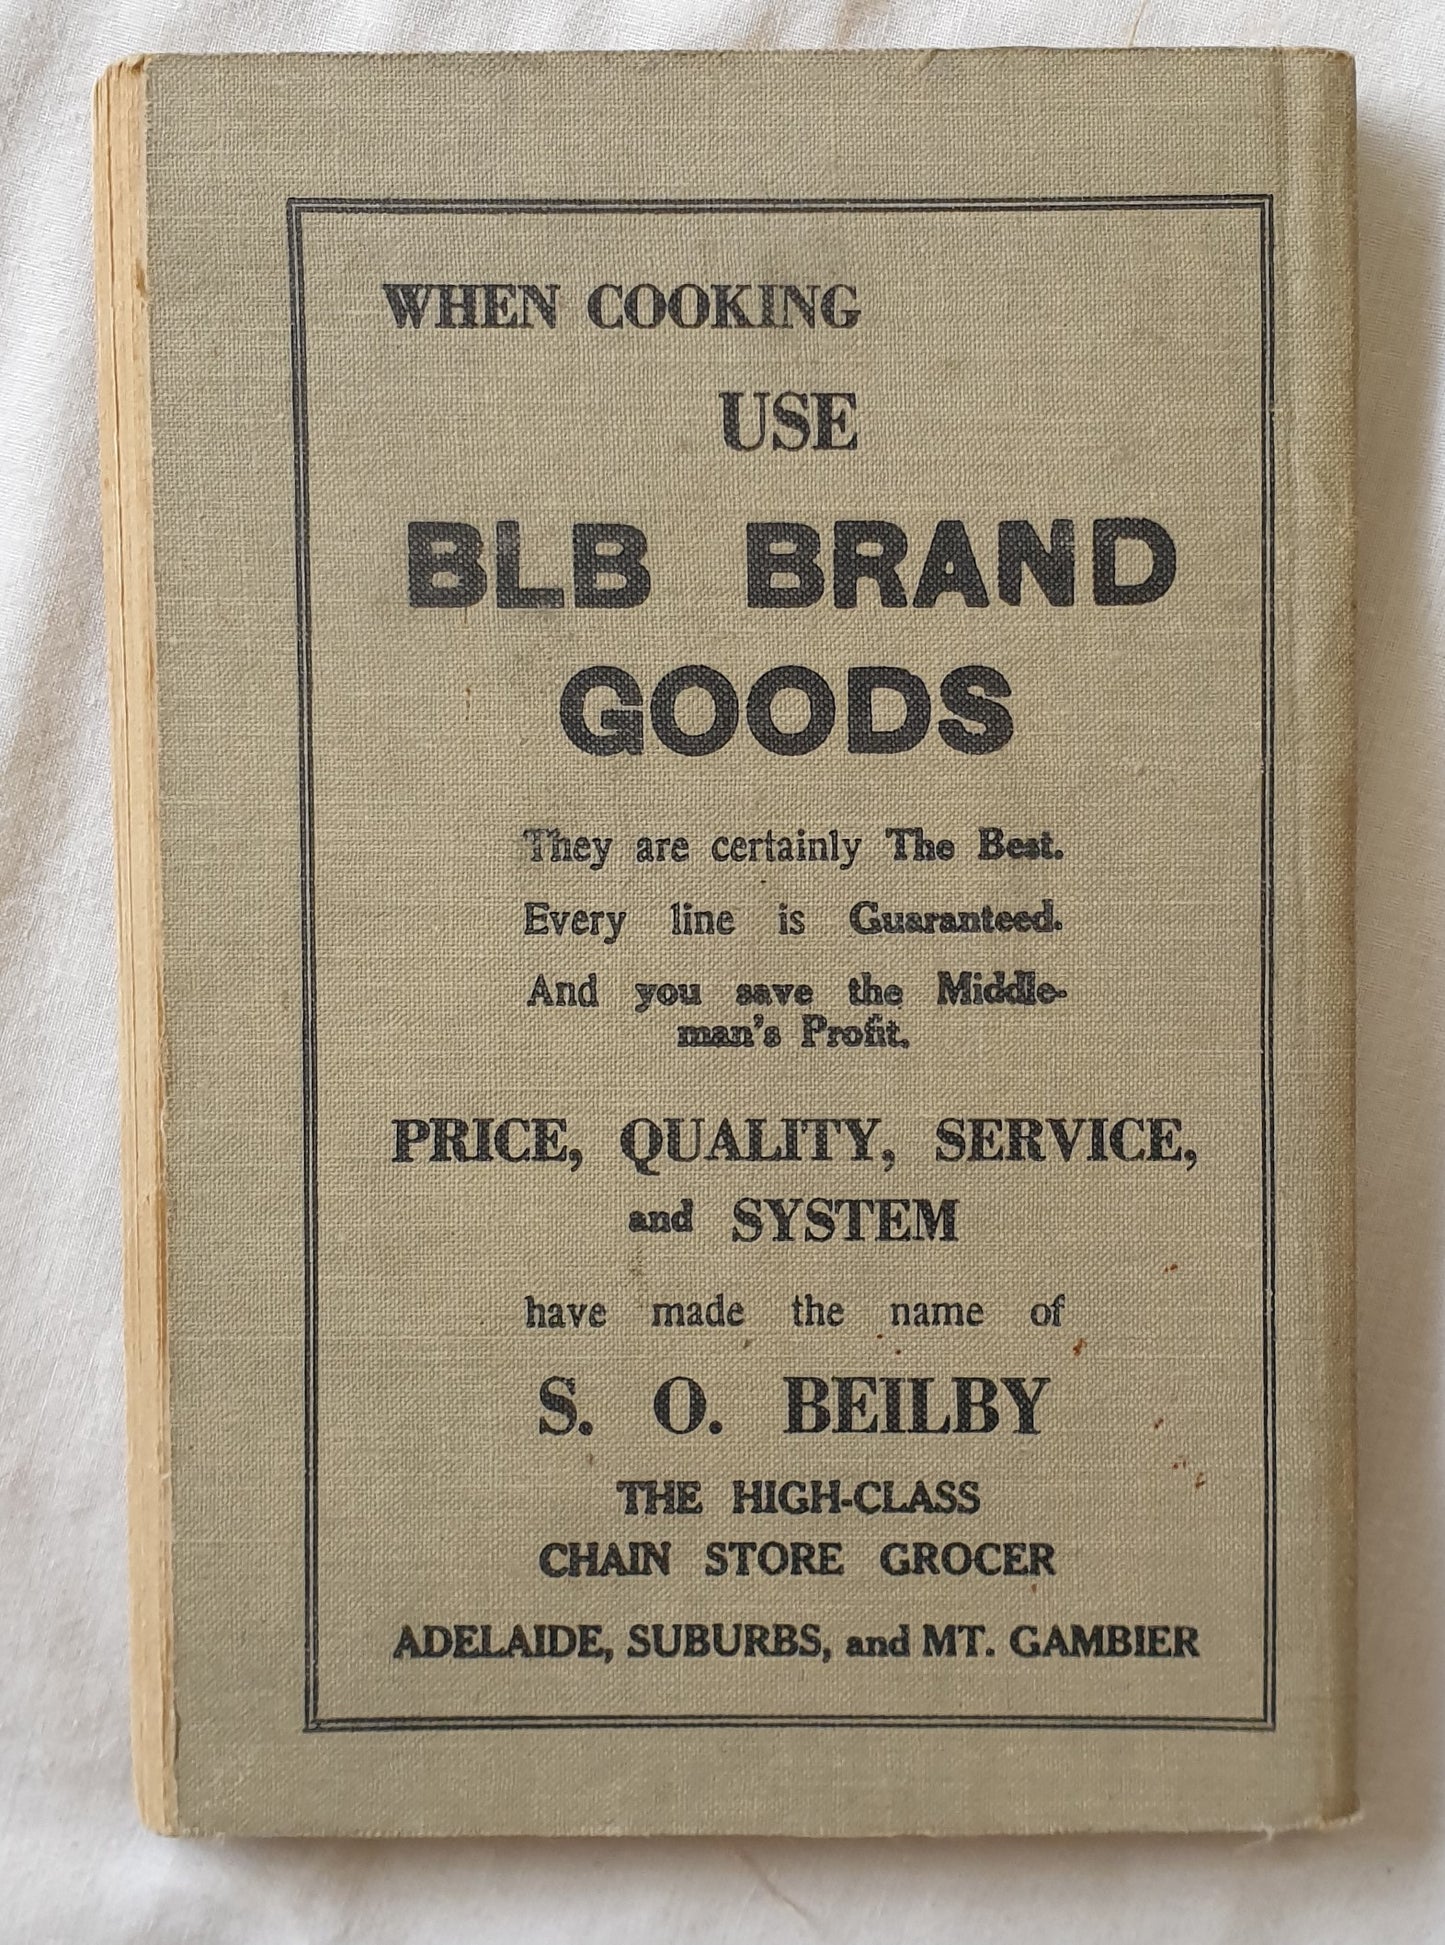 S. O. Beilby Cookery Book by S. O. Beilby